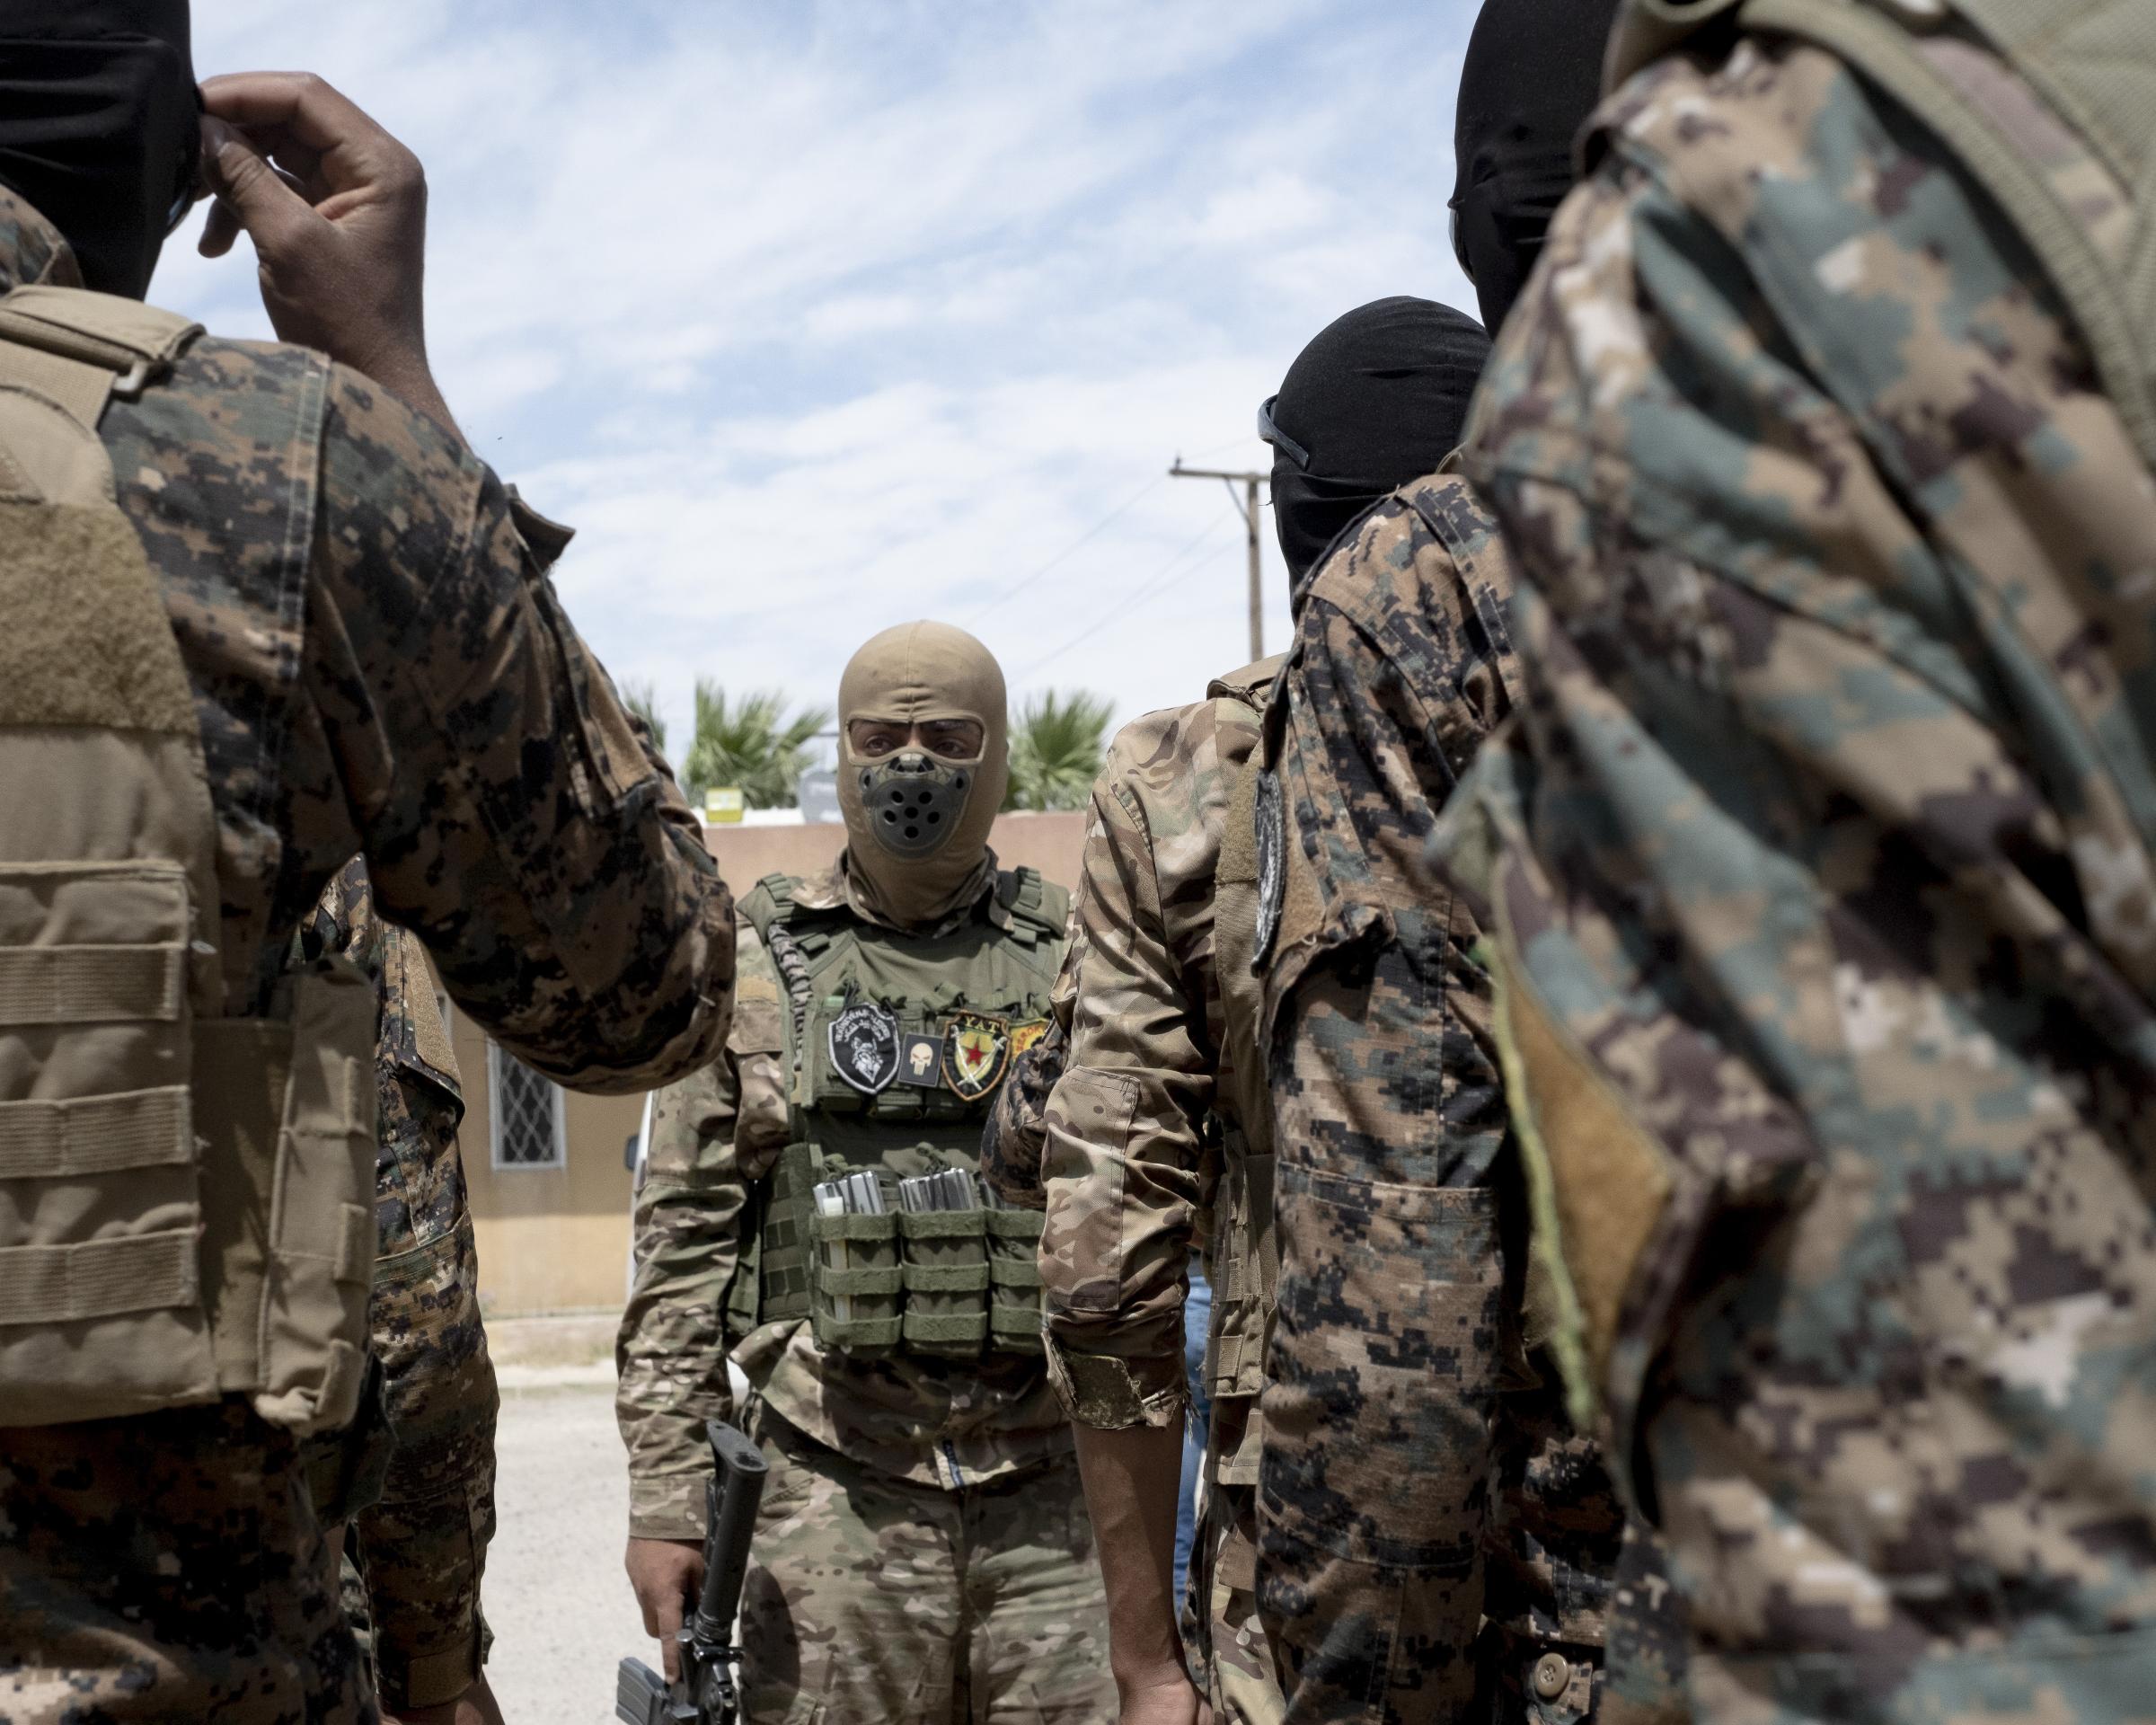 On National Geographic: 11 years into Syria's civil war, this is what life looks like - YPG commander Hezat (center) speaks with his troops in Deir Ez-Zor in May 2021. The Kurdish...